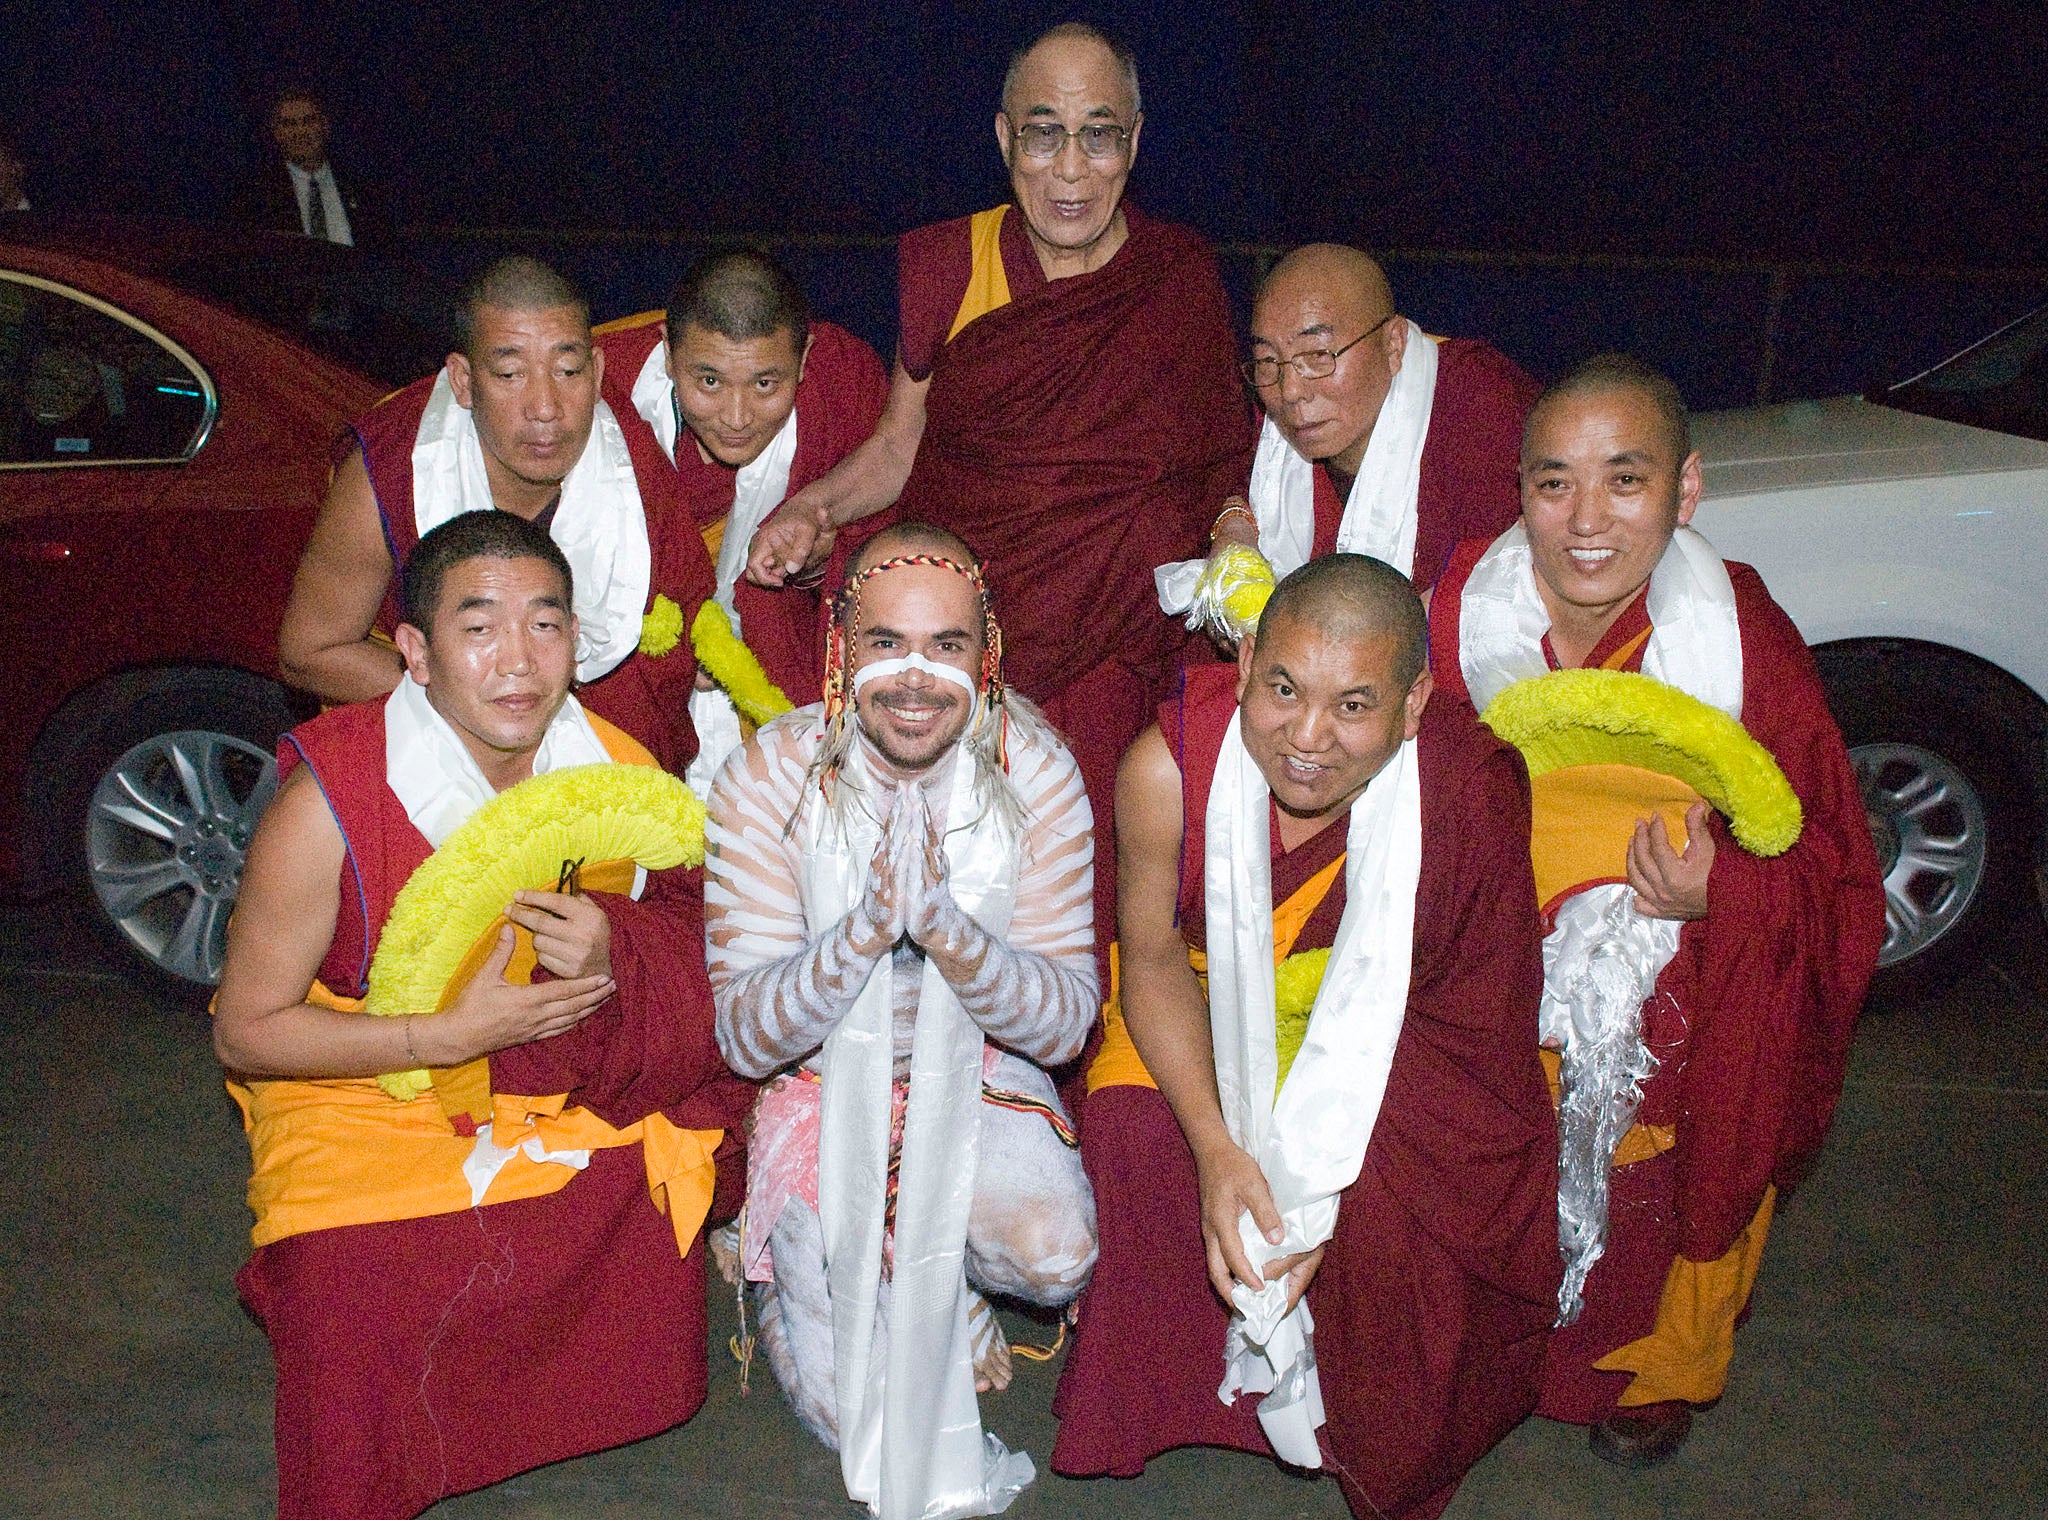 The Gyuto Monks of Tibet with the Dalai Lama